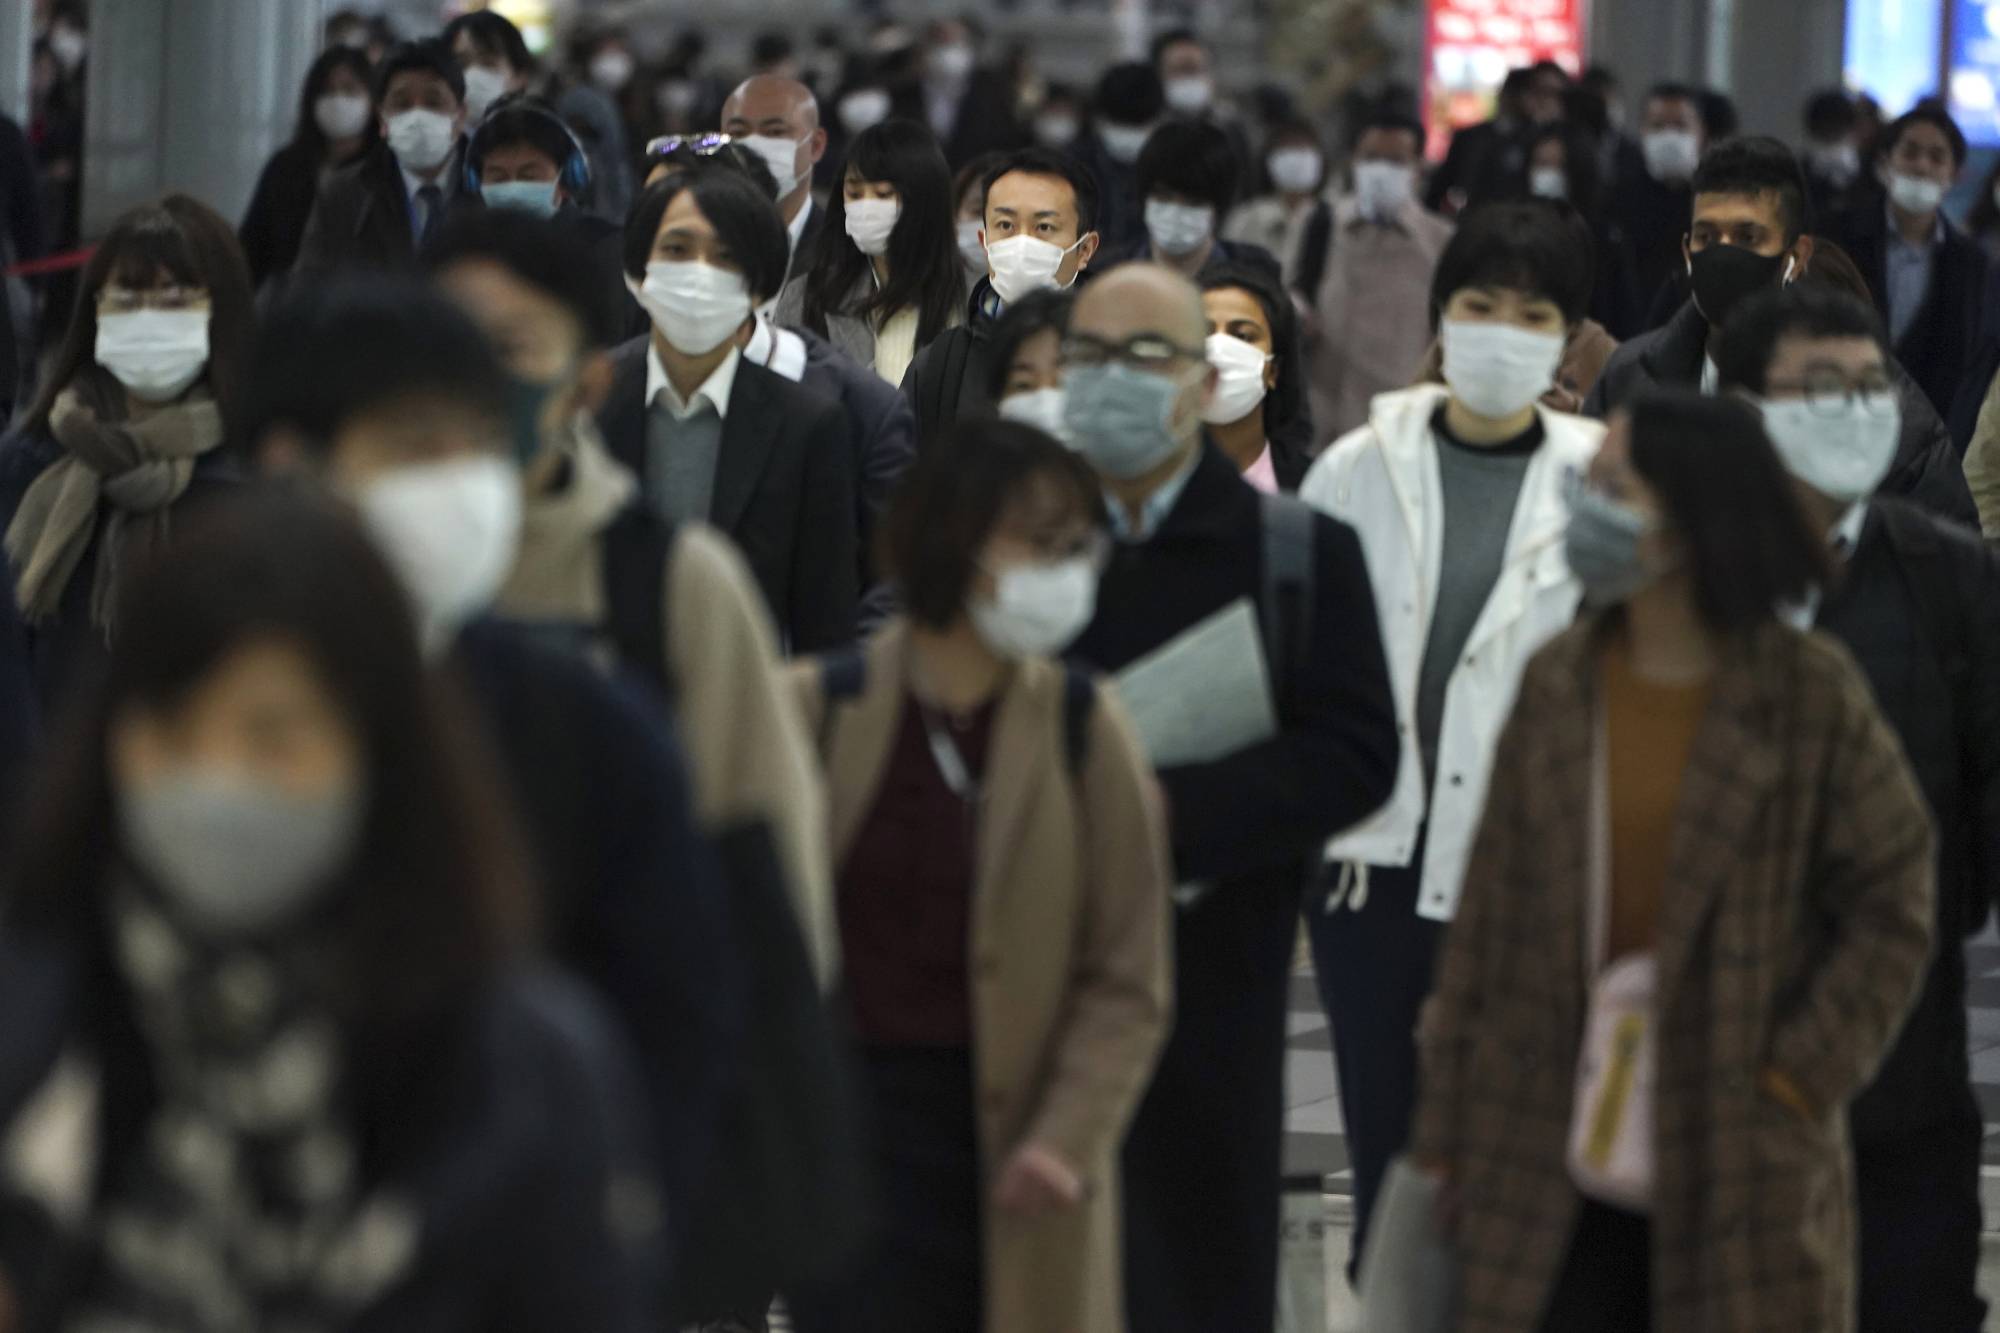 Social habits in Japan such as wearing face masks during seasonal flu outbreaks might play some role in hindering transmission of the coronavirus. | AP